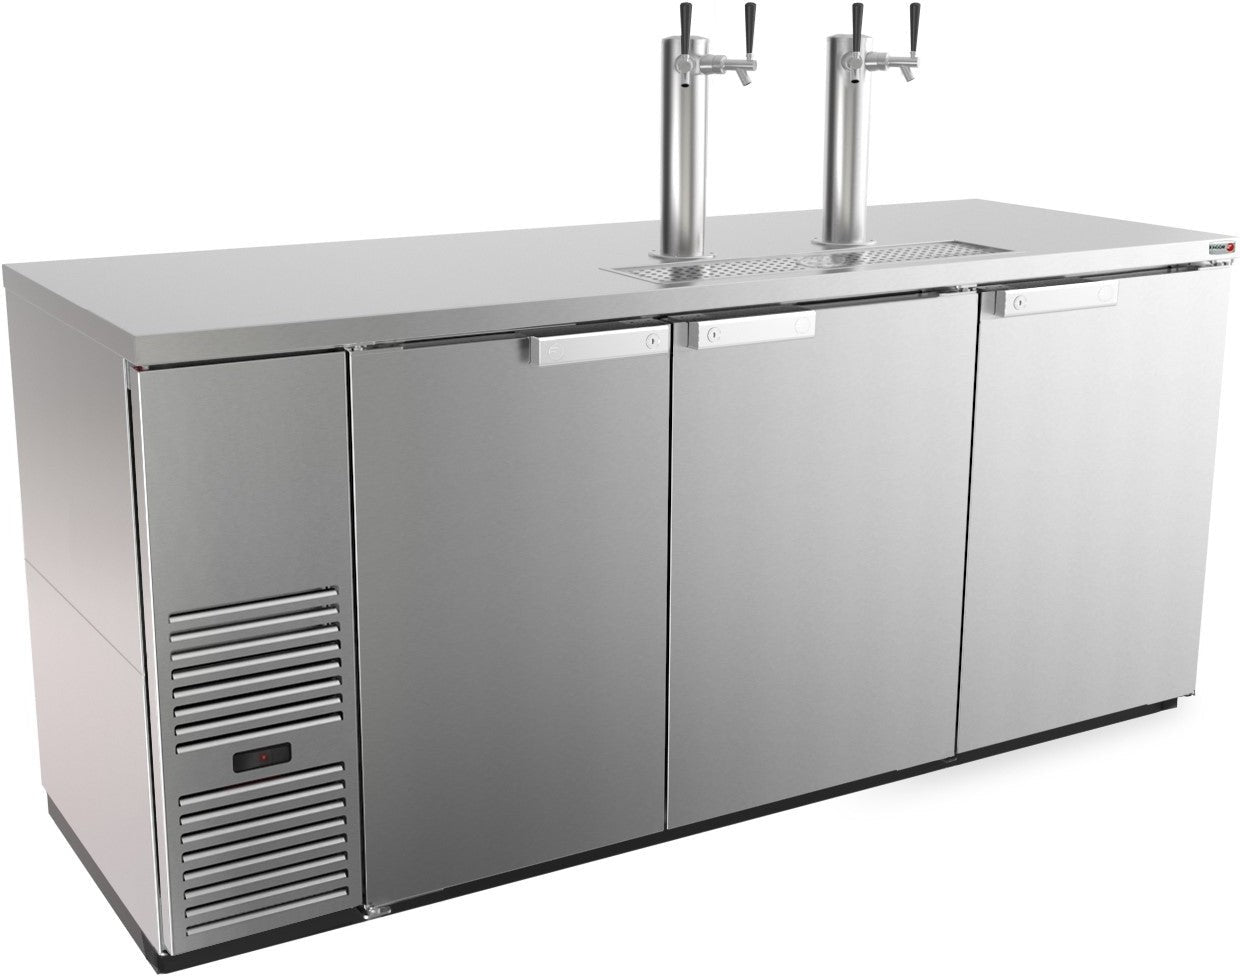 Fagor - FDD Series 115 V, 80" Three Doors Stainless Steel Direct Draw Beer Cooler with 2 Towers & 4 Taps - FDD-79S-N